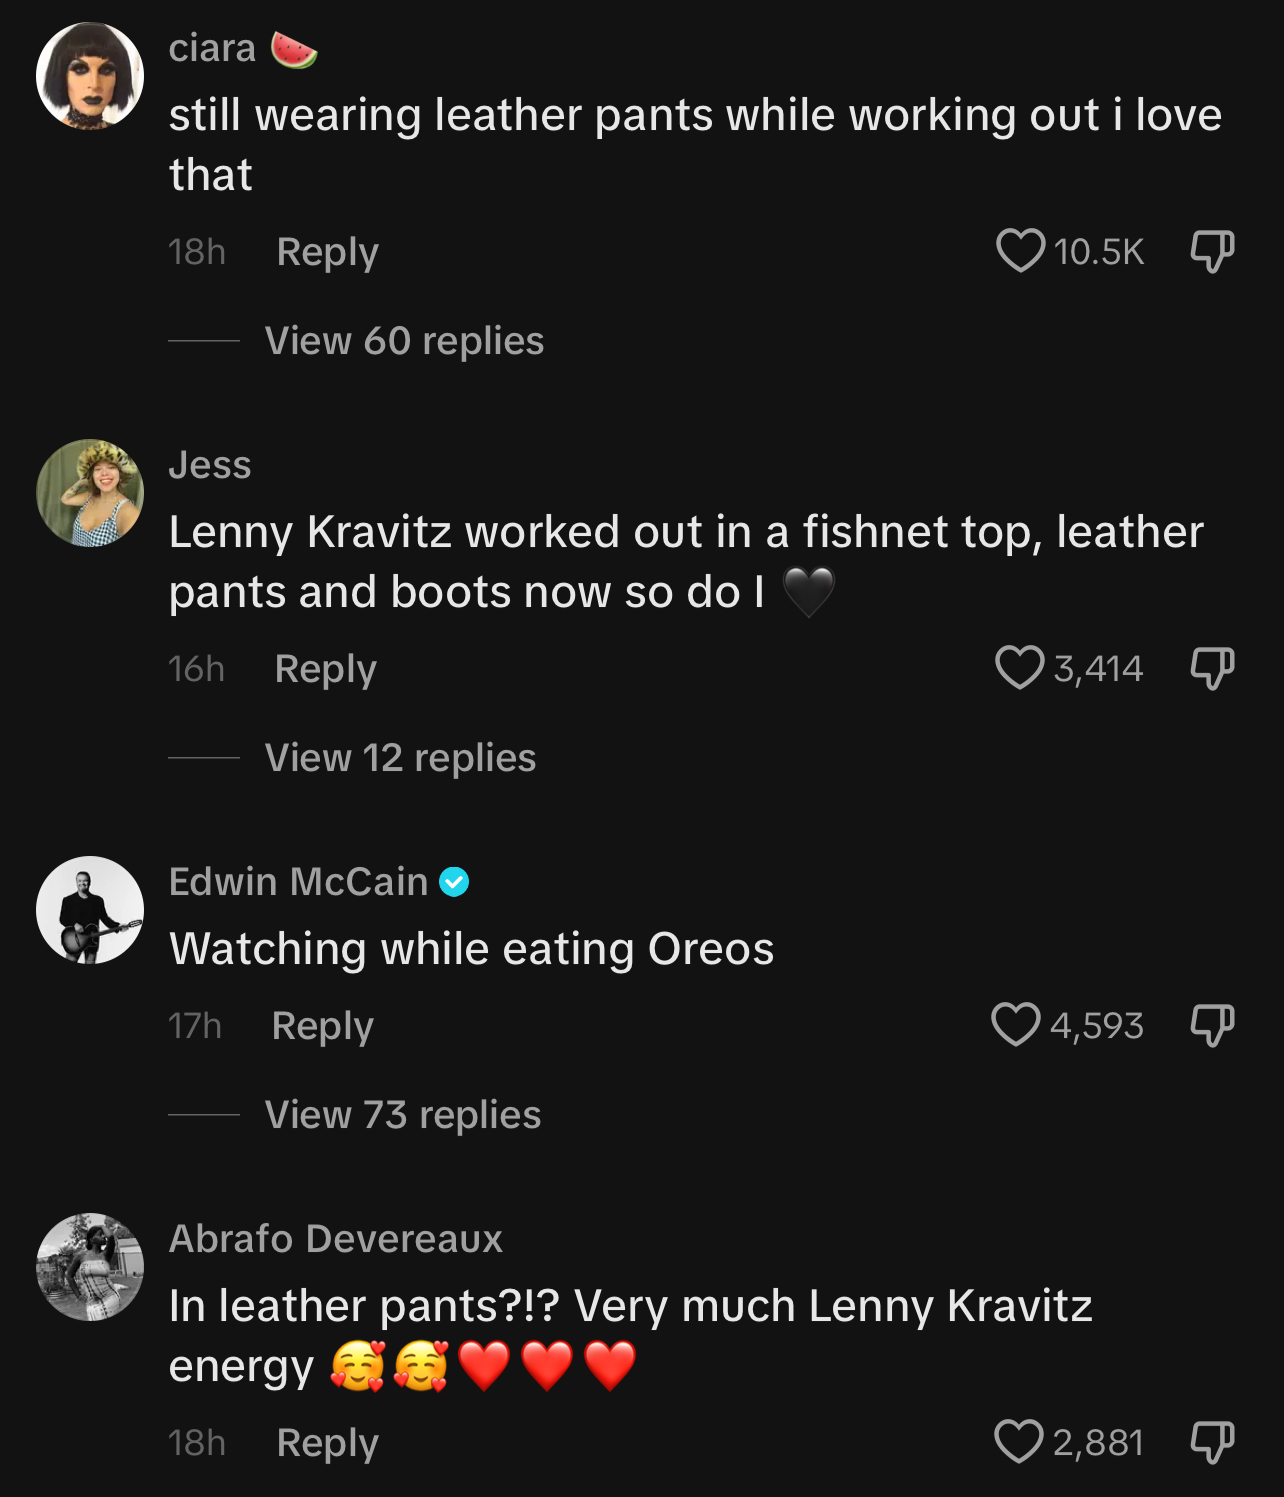 User comments on a social media post discussing fashion choices, with references to celebrities and playful emojis